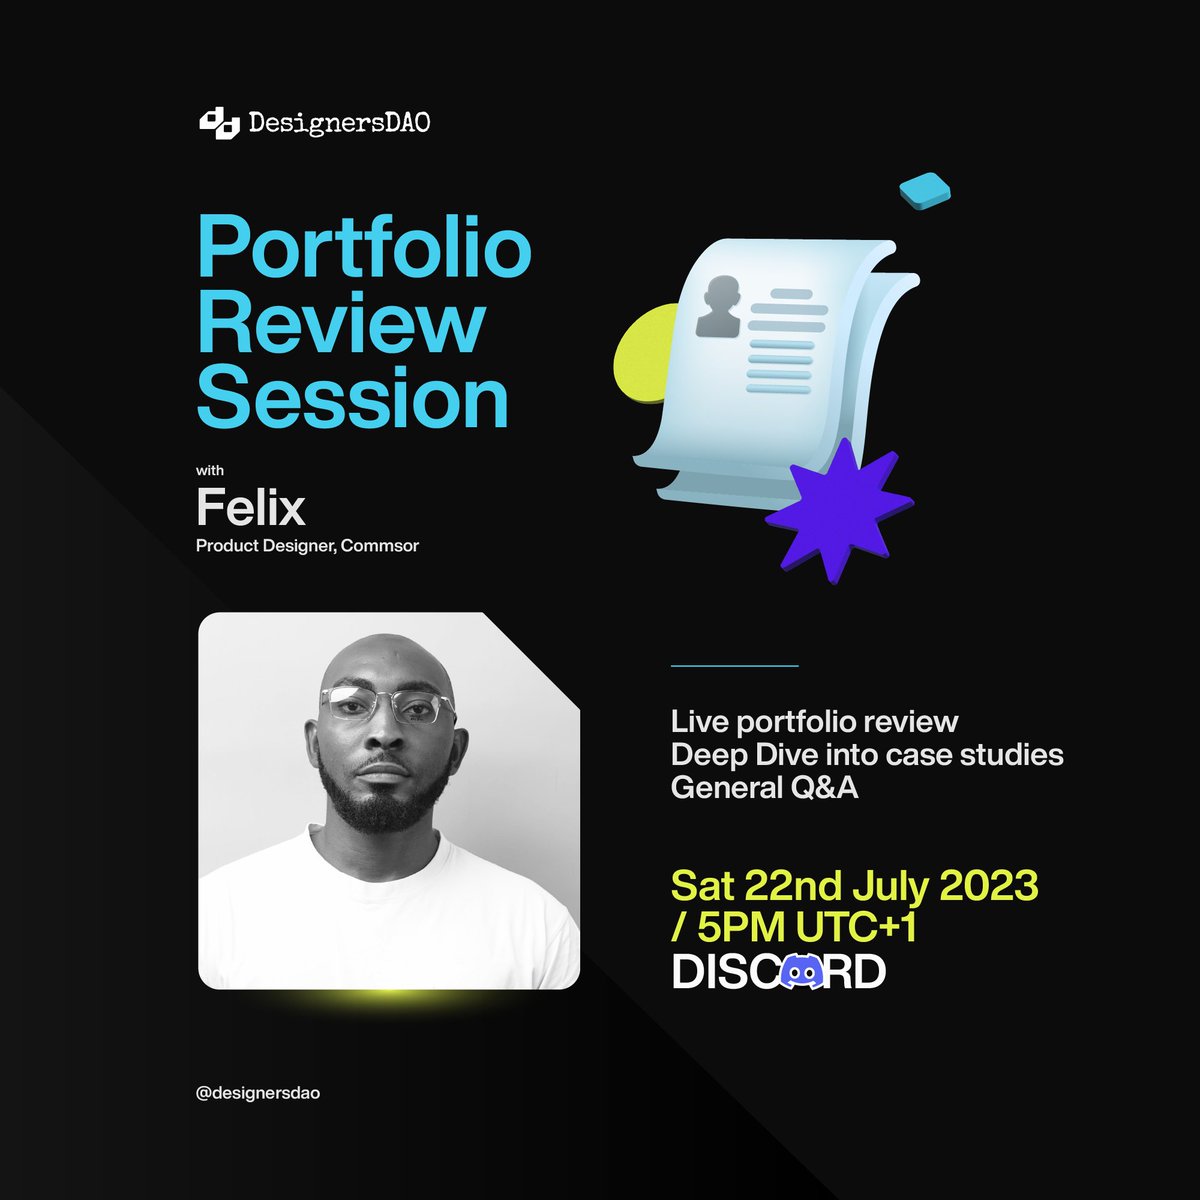 Write case studies or simply display final designs? Present projects in single columns or grids? What do companies look out for in a design portfolio? We answer these top questions and more at the live portfolio review session with @Felix_Eny, happening on the 22nd of July.